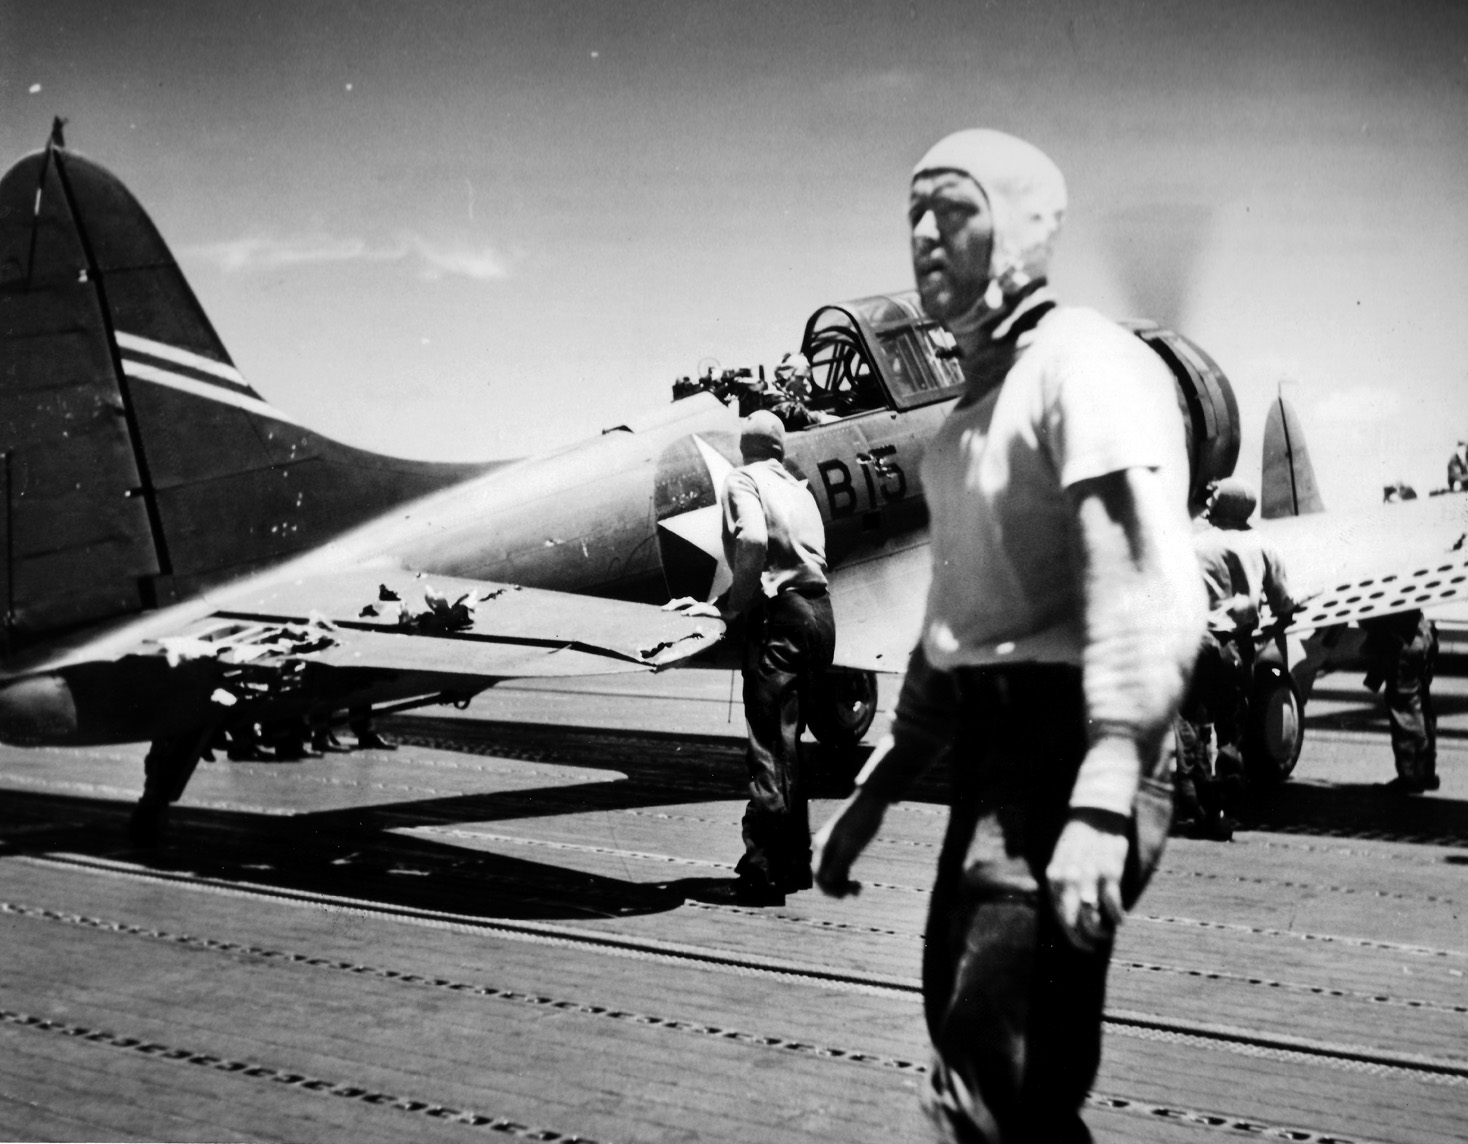 Following its attack against the Japanese aircraft carrier Kaga on June 4, a damaged Douglas SBD-3 Dauntless dive bomber rests on the flight deck of the carrier USS Yorktown. This dive bomber, one of several that landed with their fuel tanks nearly empty, belonged to Bombing Squadron 6 (VB-6) and was lost when the Yorktown was sunk later in the battle. 